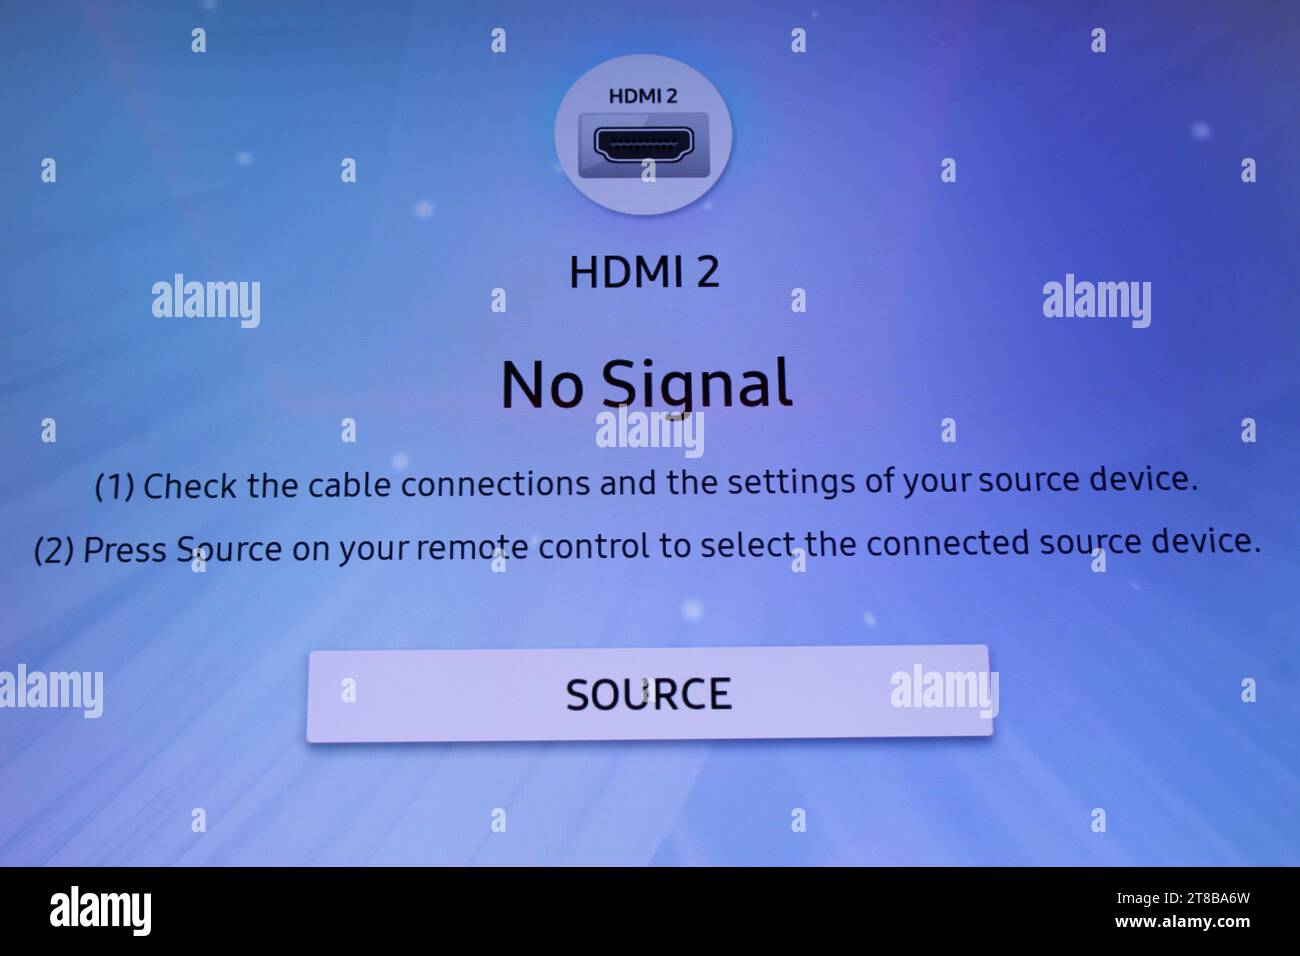 No signal from HDMI connection message text graphic Stock Photo